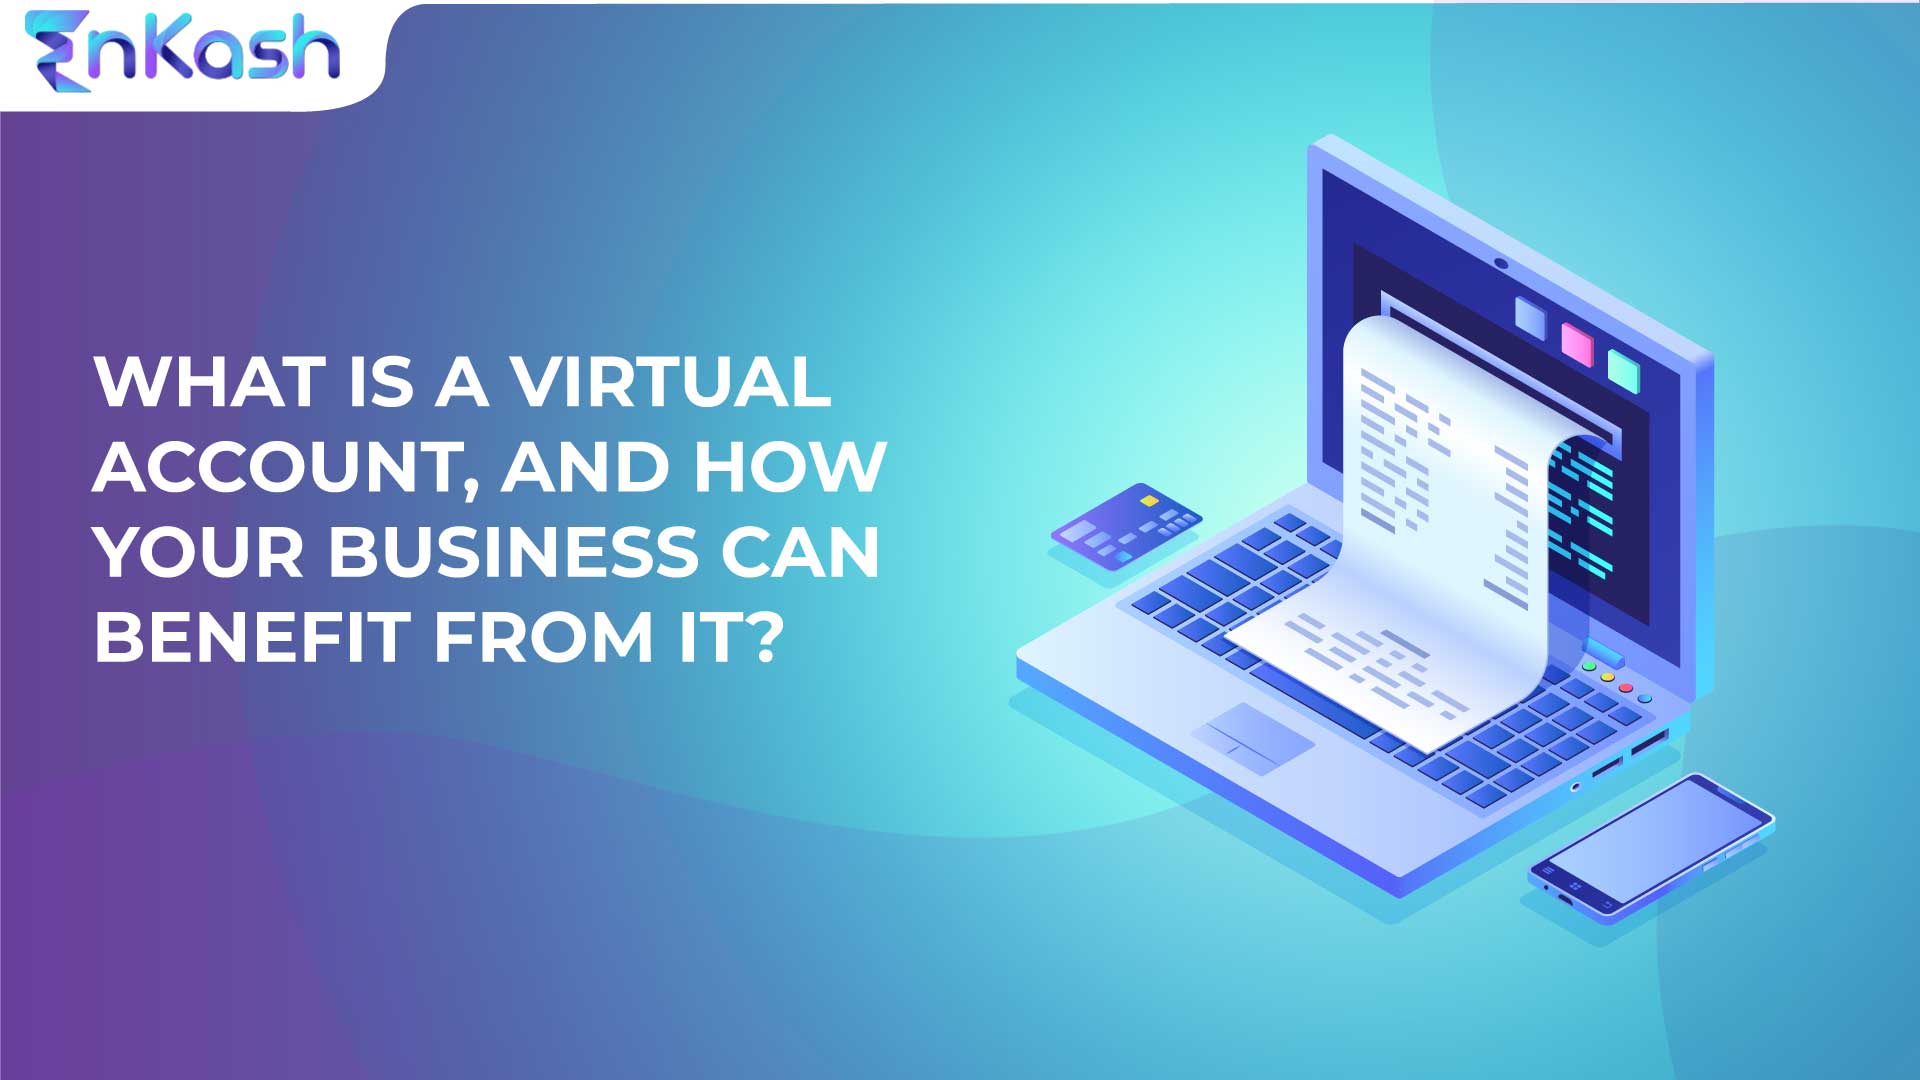 What Is a Virtual Account, and How Your Business Can Benefit from It?